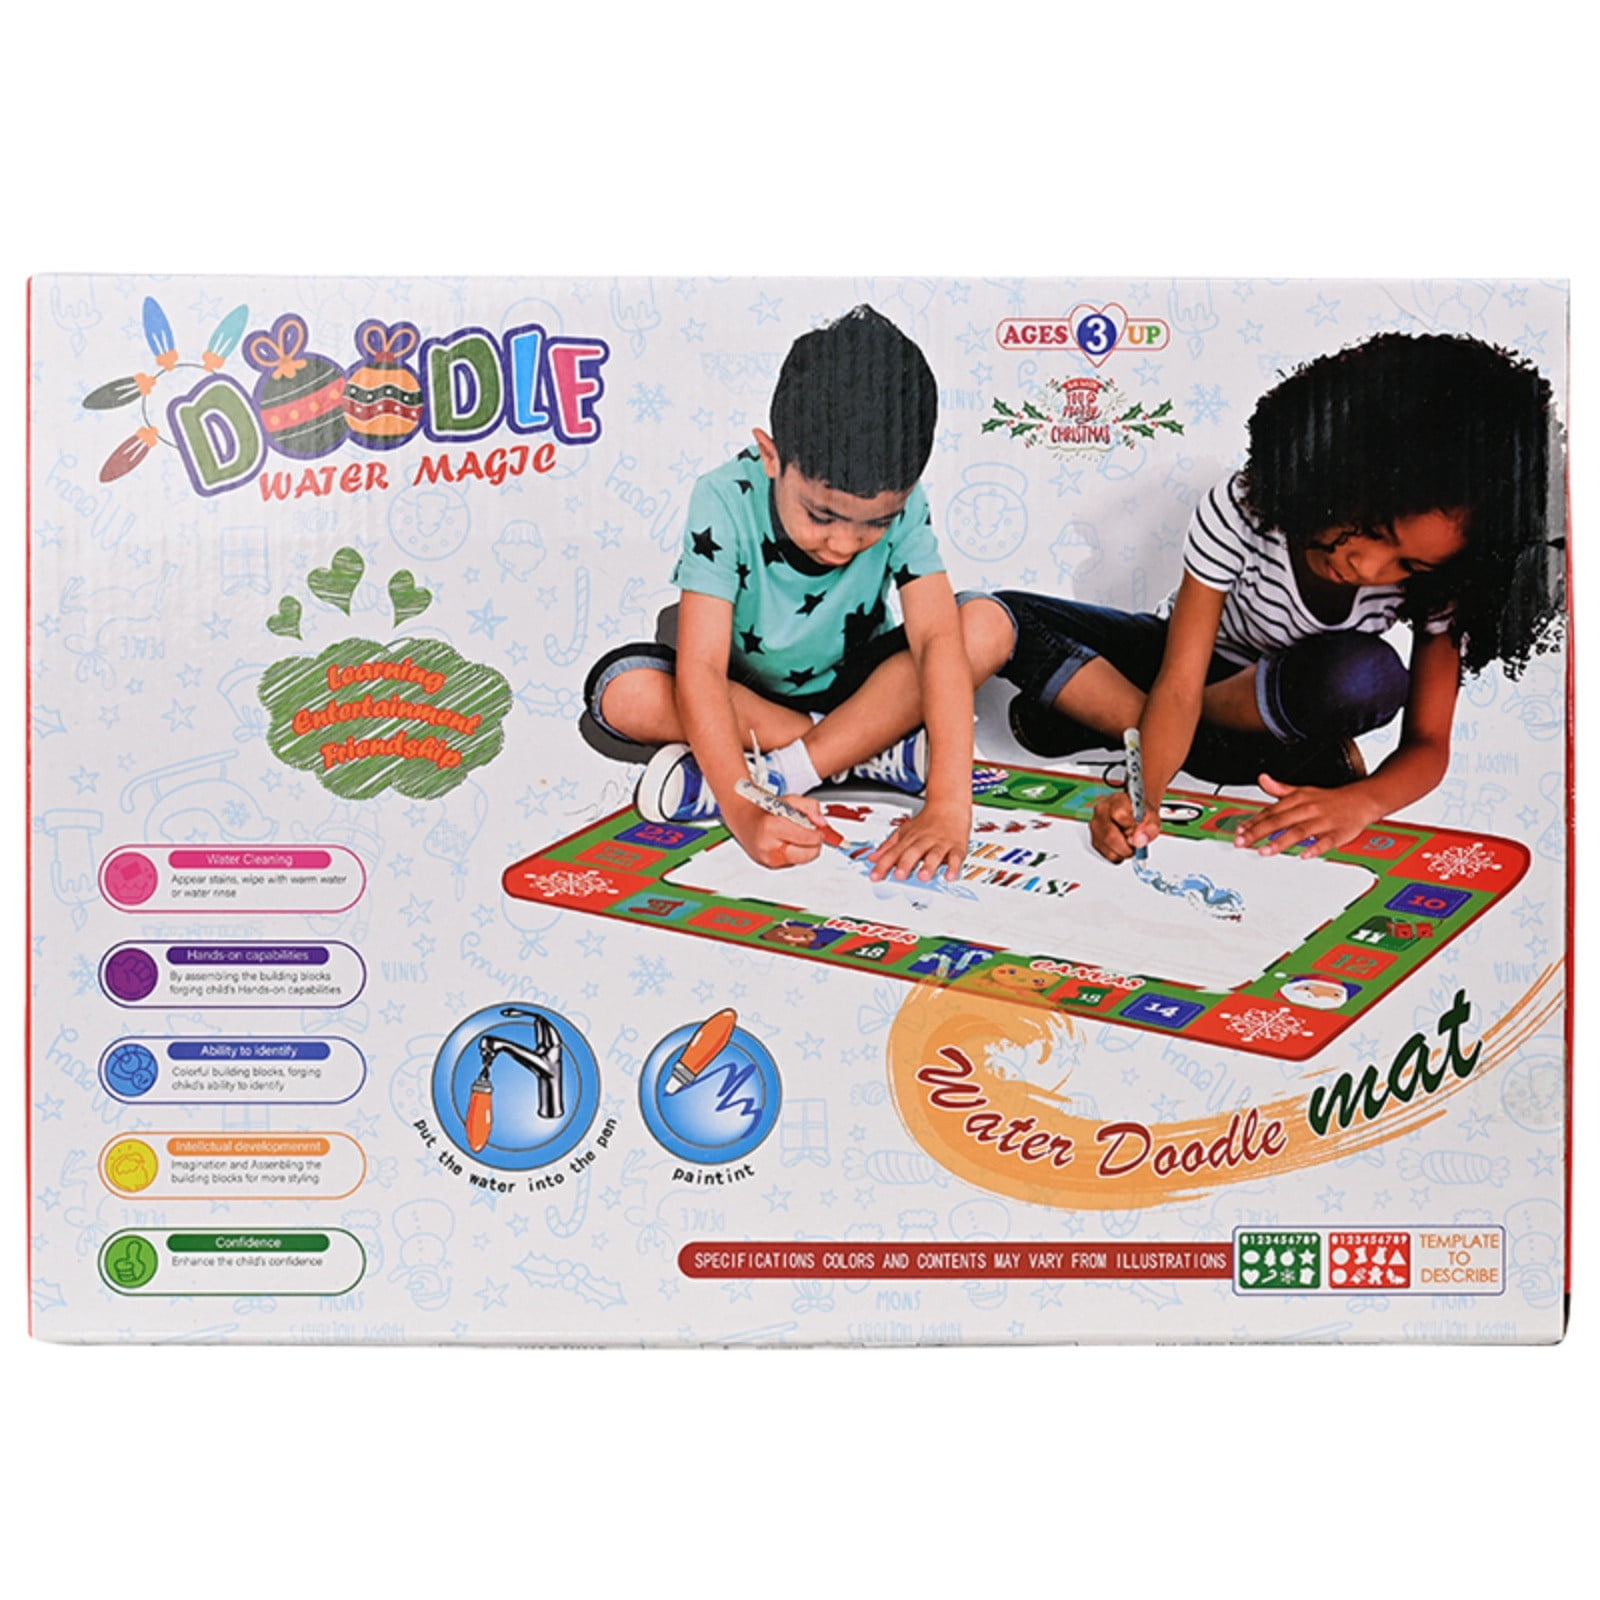 Arts & Crafts Present Gift Idea For Treat Reward or Pocket Money Age 5+ Boys Boy Child Kids Children 4M Build Your Own Dinosaur Stamp Factory Must Have Creative Easy To do Set